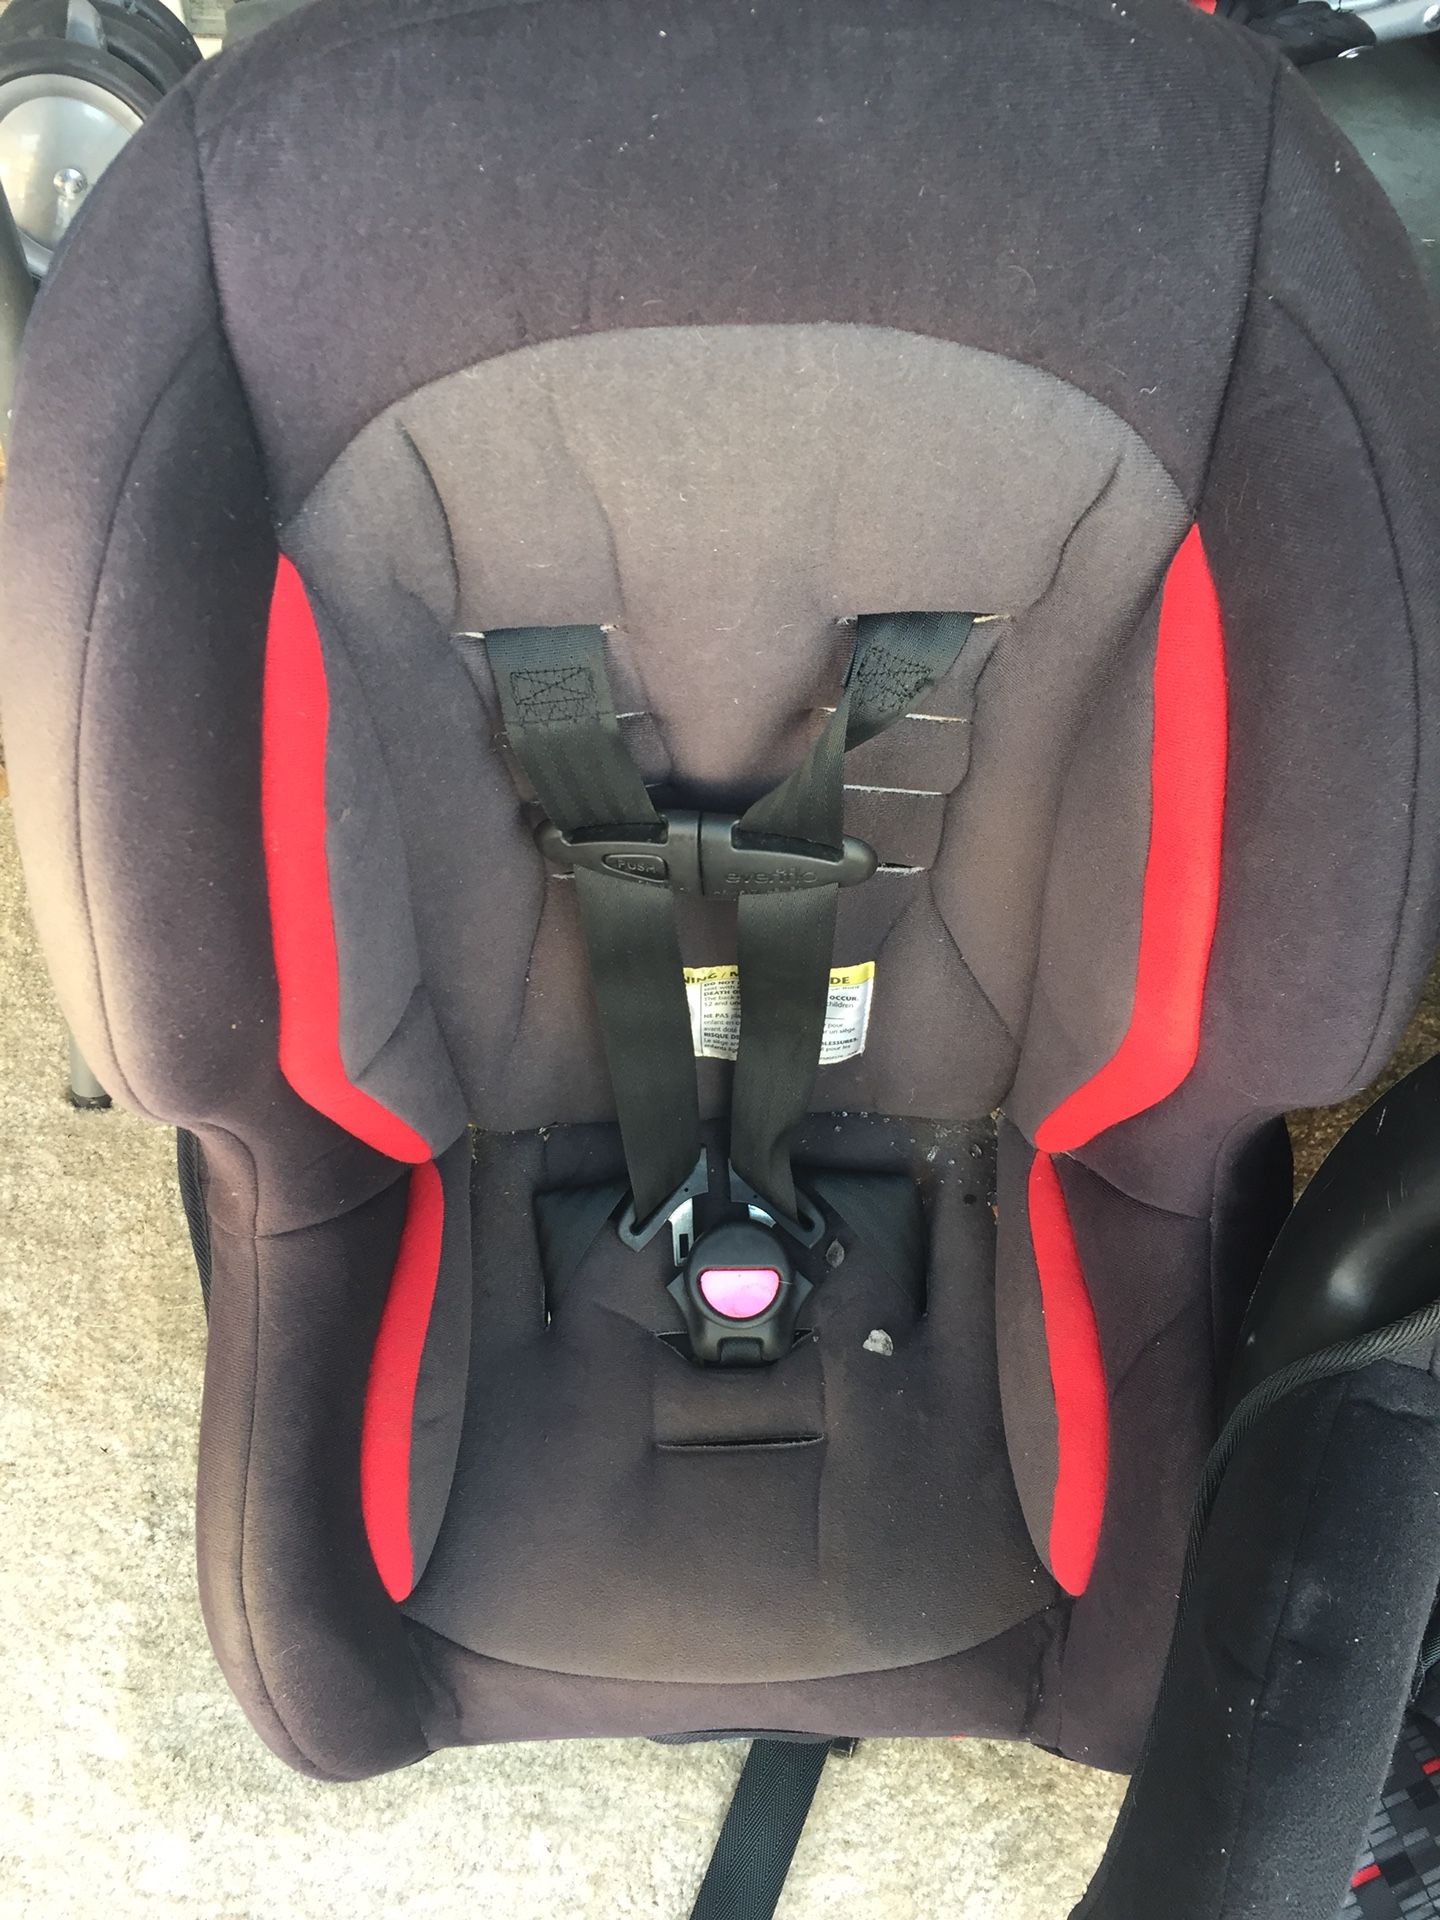 Car seats For toddlers